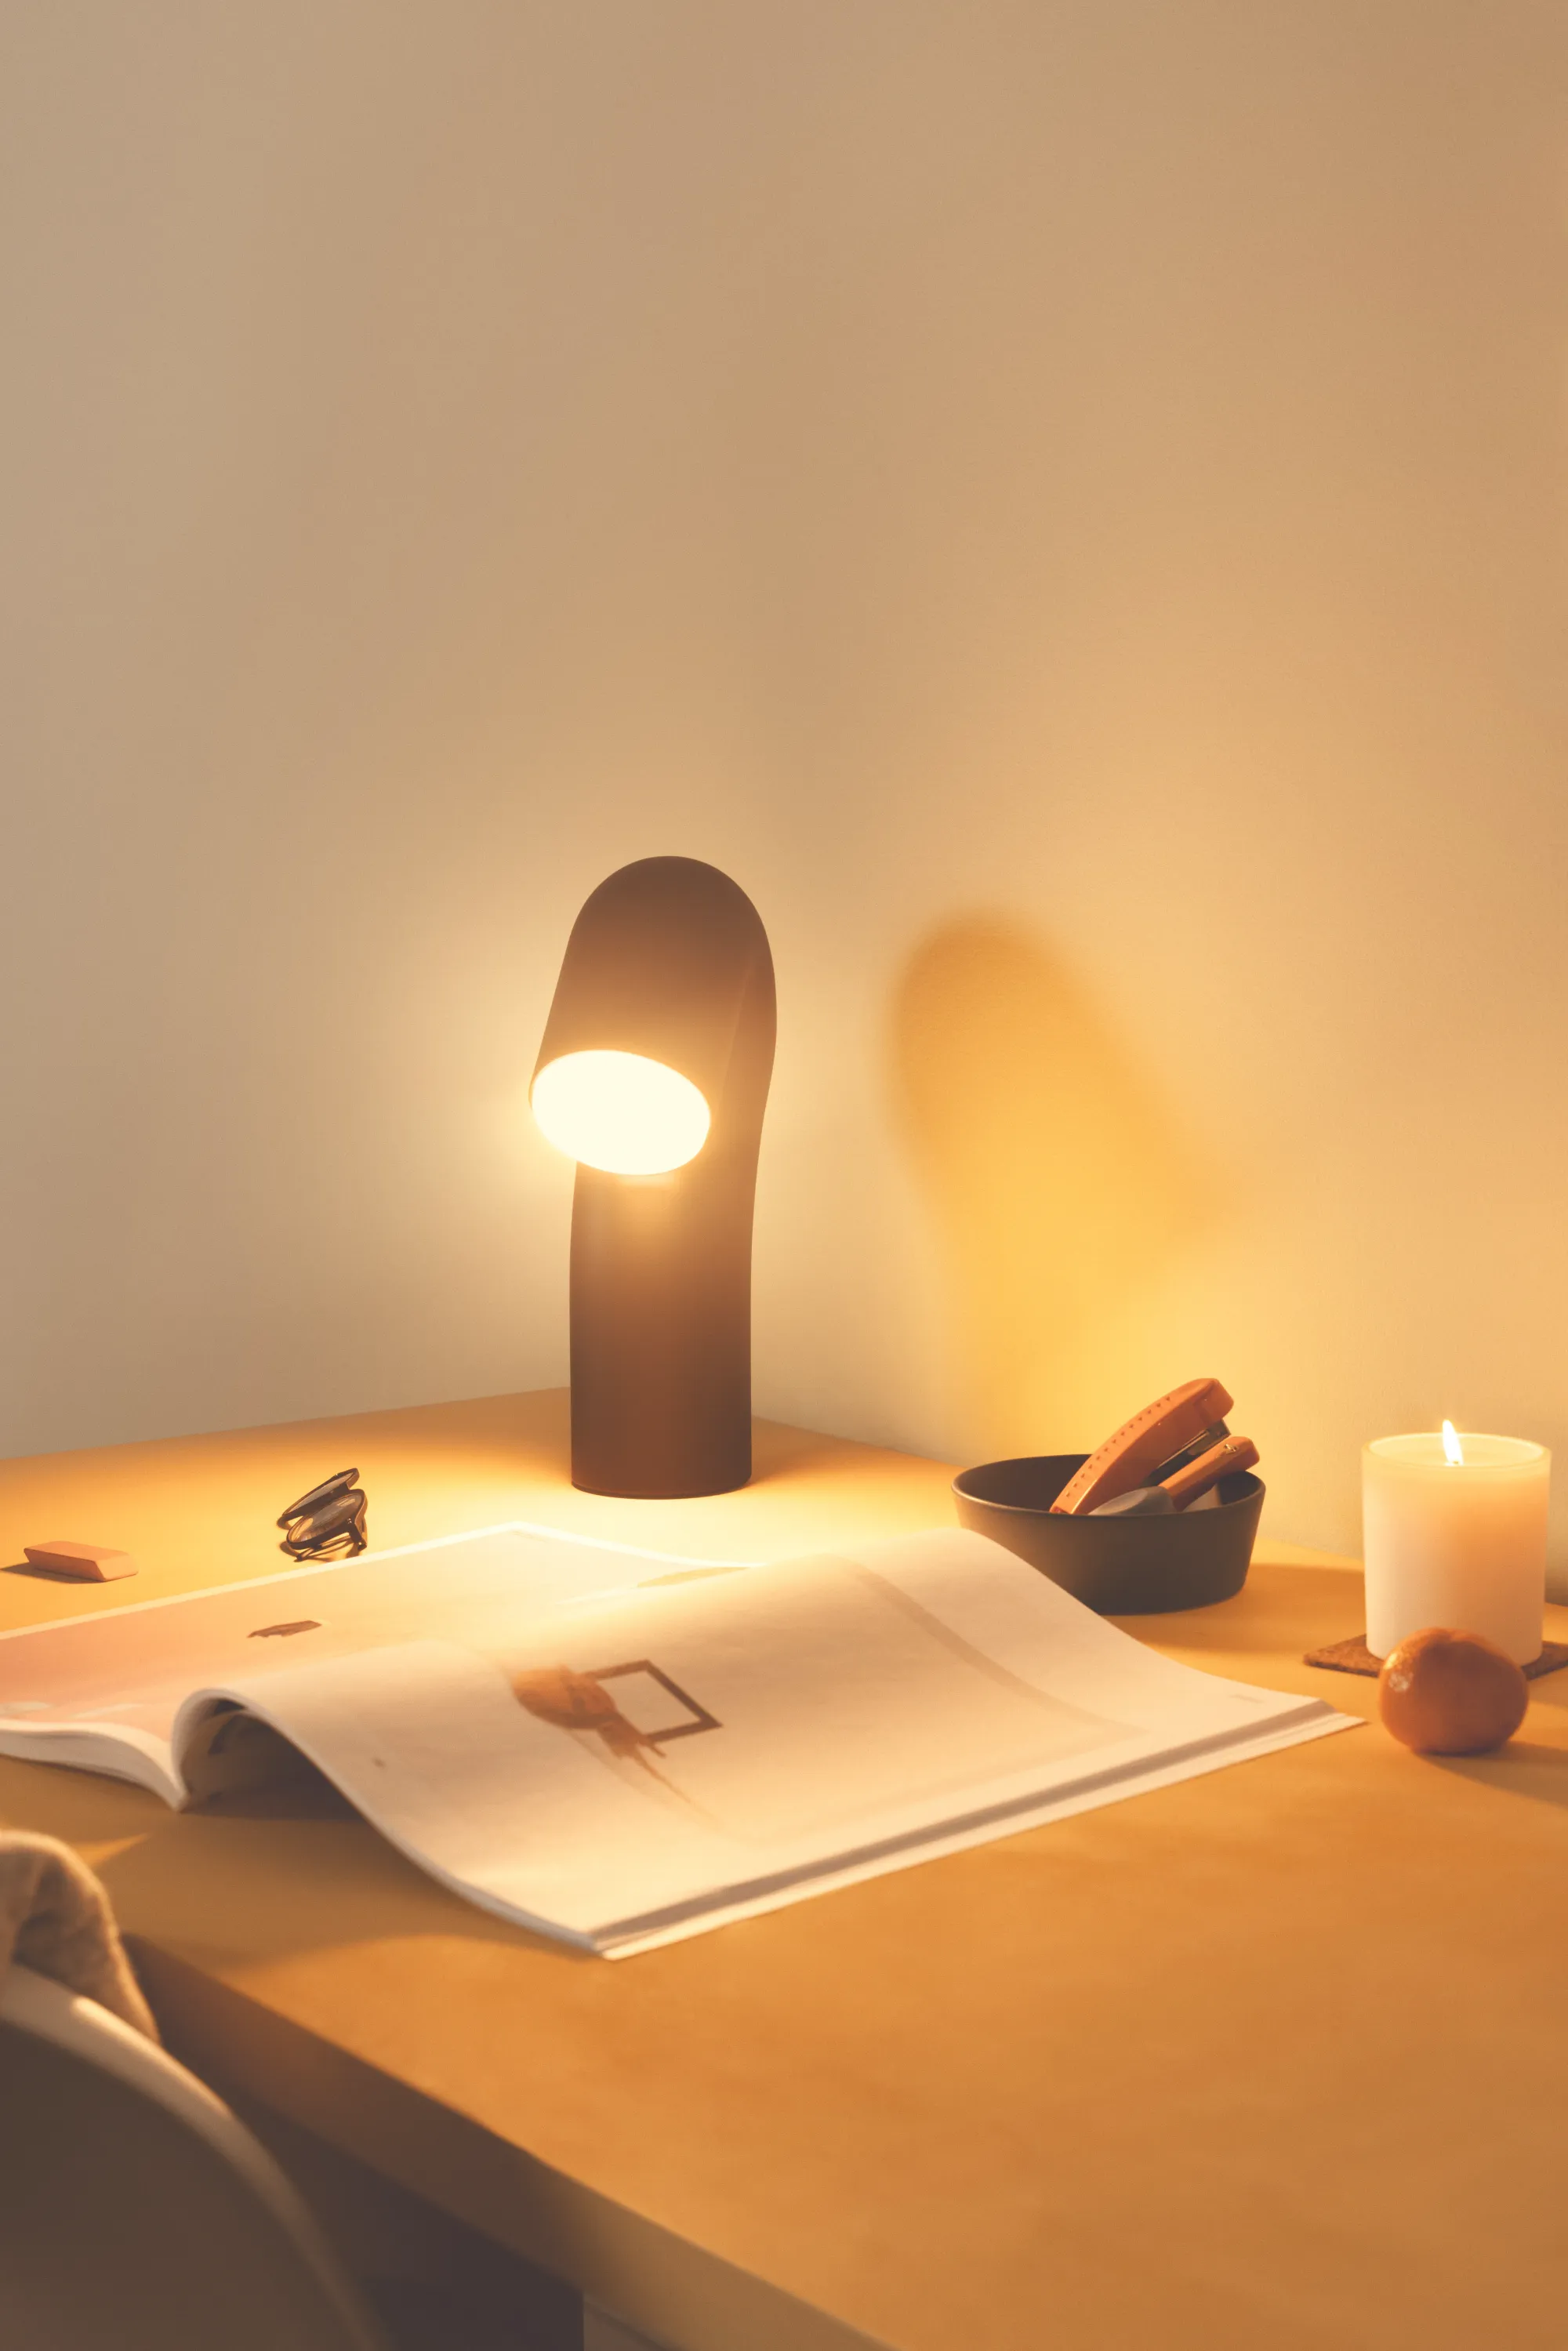 The black Smoothy table lamp brightly illuminates the pages of a book.